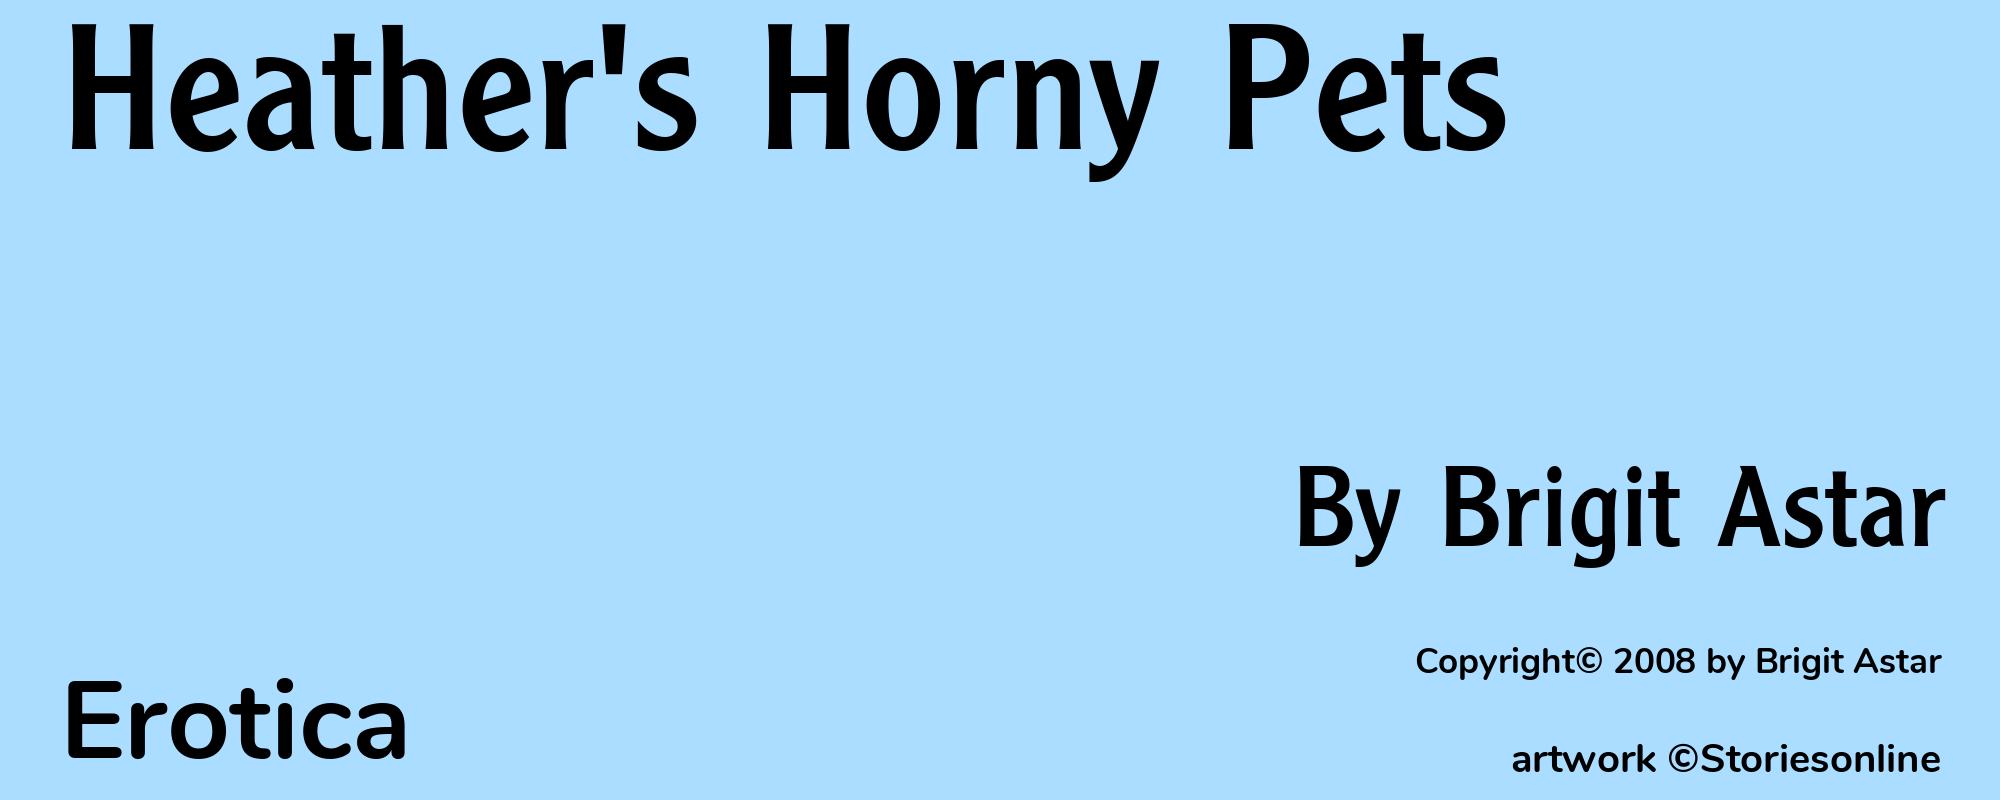 Heather's Horny Pets - Cover